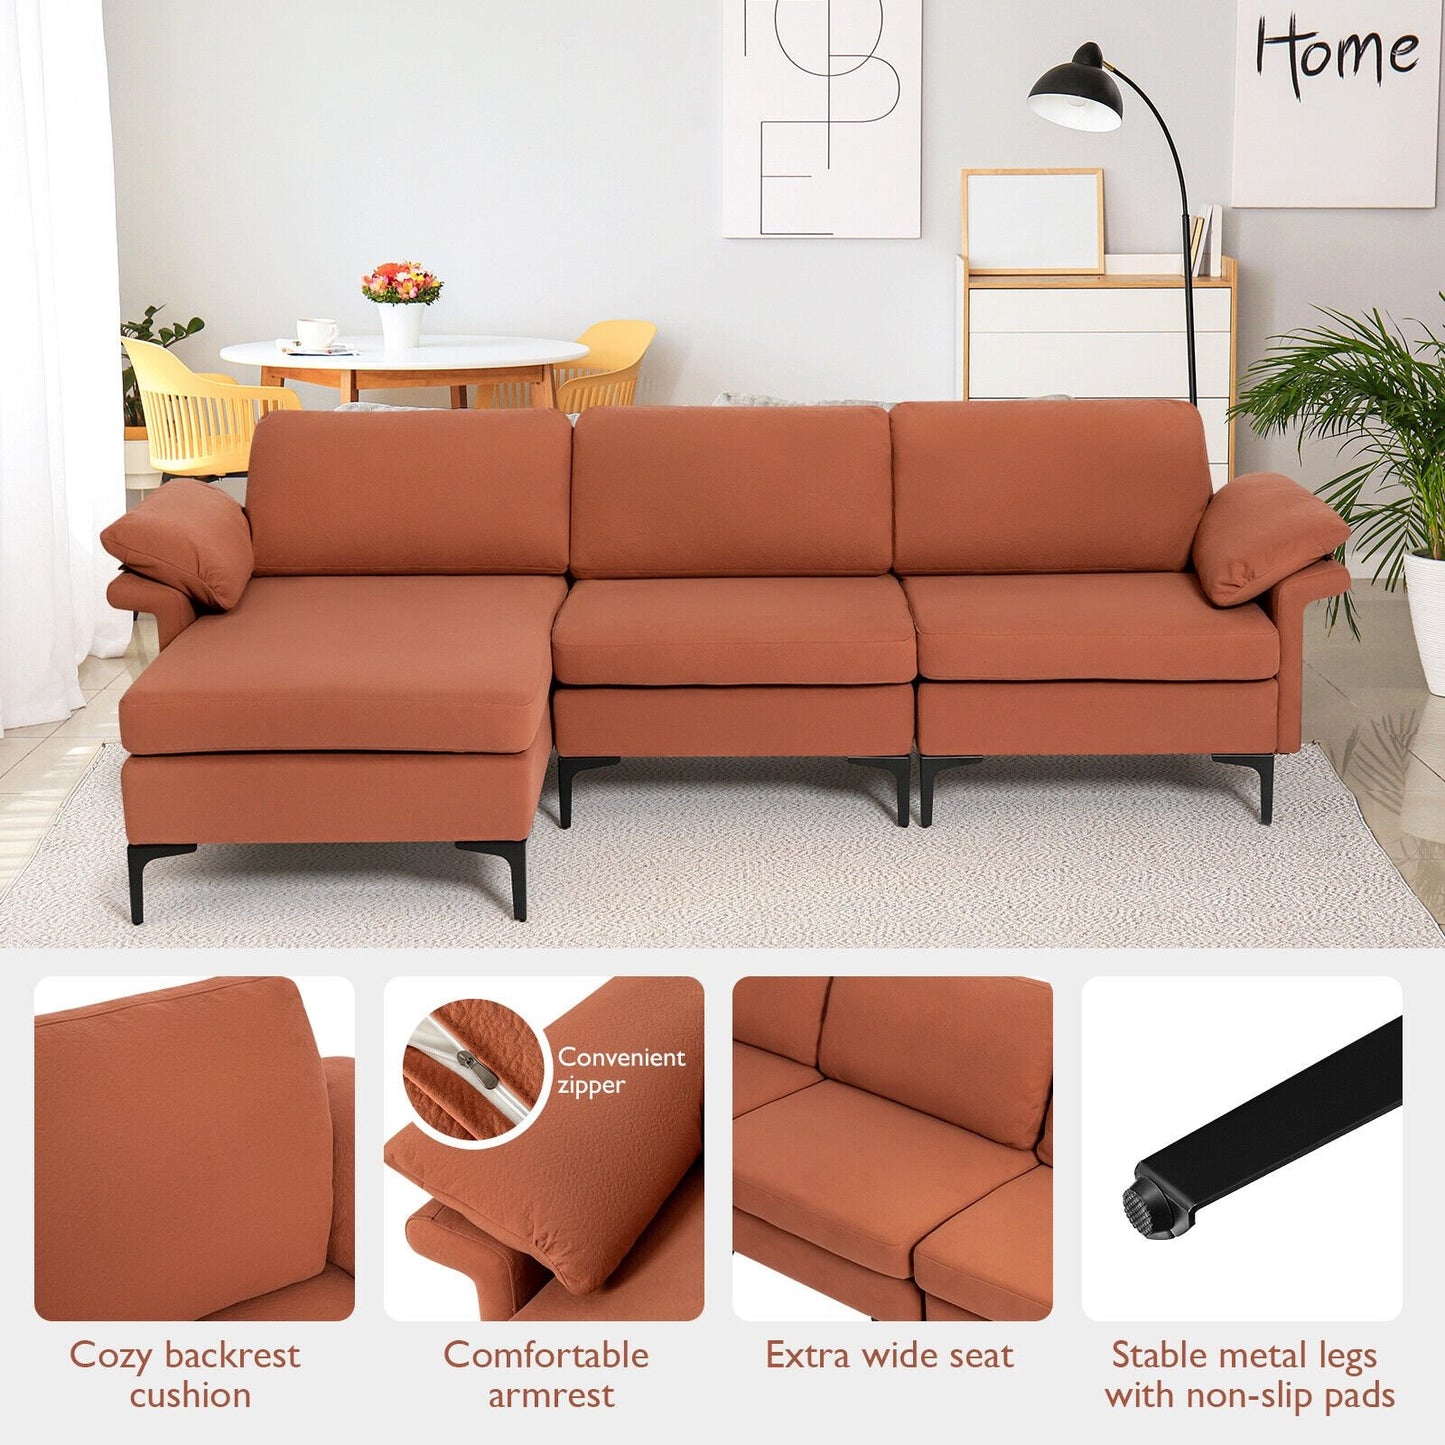 Extra Large Modular L-shaped Sectional Sofa with Reversible Chaise for 4-5 People-Rust Red, Red